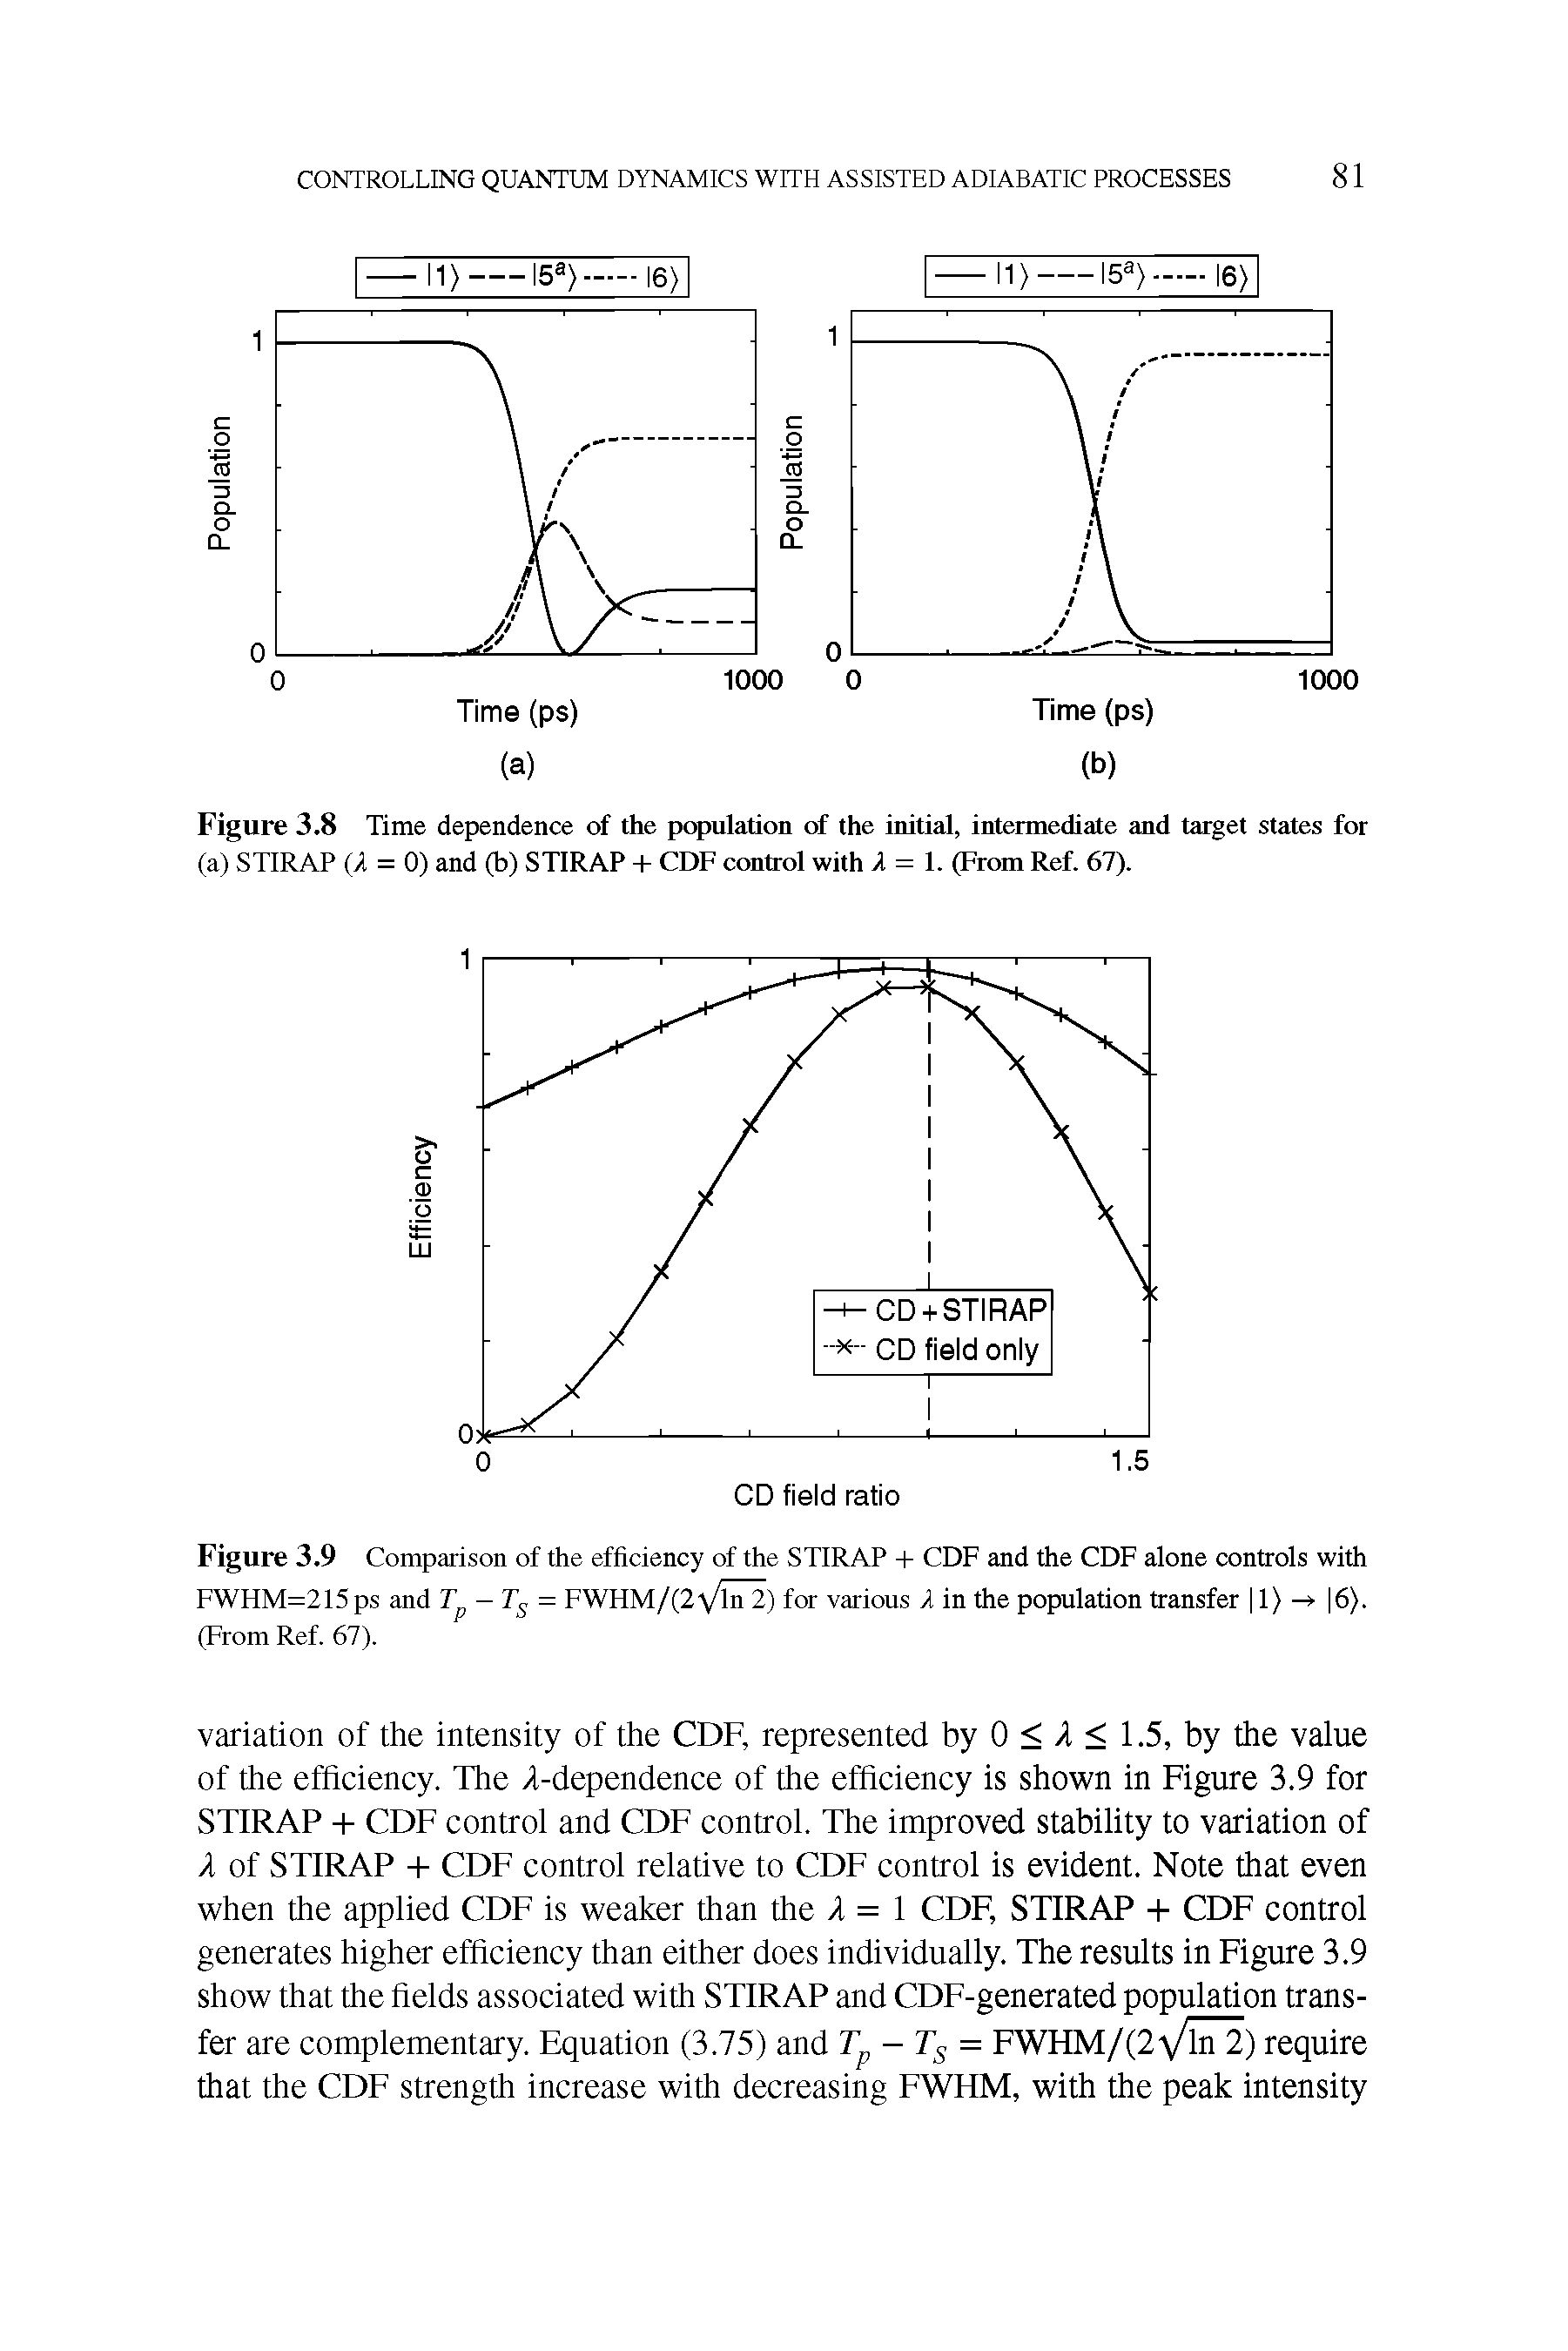 Figure 3.9 Comparison of the efficiency of the STIRAP + CDF and the CDF alone controls with FWHM=215ps and T -Tg = FWHM/(2 /ln 2) for various A in the population transfer 11) -> 6). (From Ref. 67).